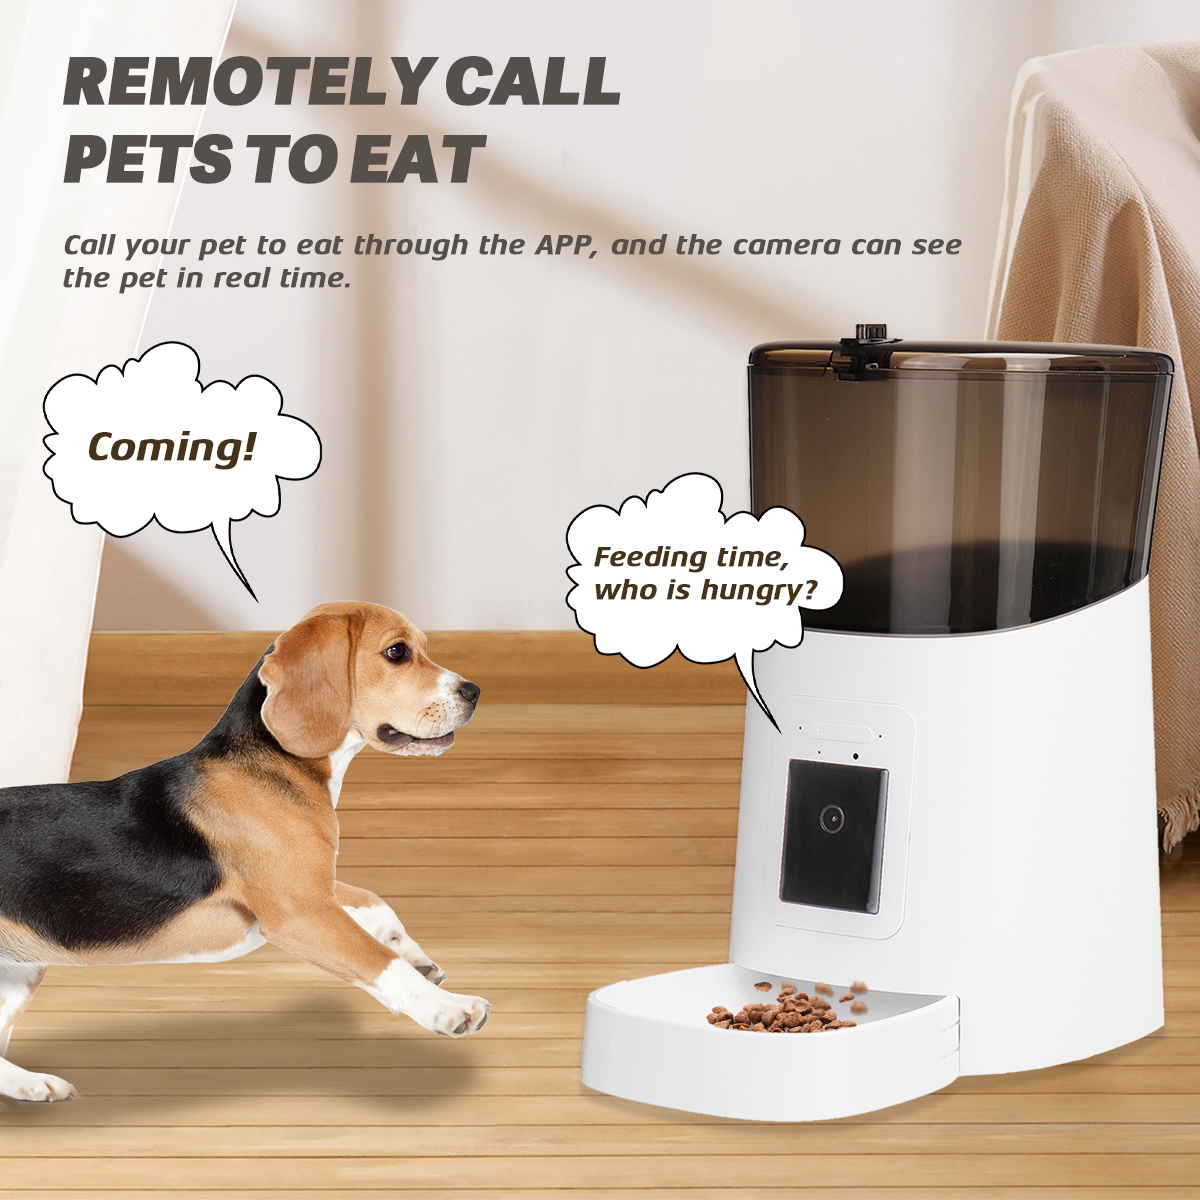 6L-Remote-Visibility-Pet-Feeder-Timing-Automatic-For-Cats-Dogs-WiFi-Intelligent-Swirl-Smart-Food-Dis-1957203-4